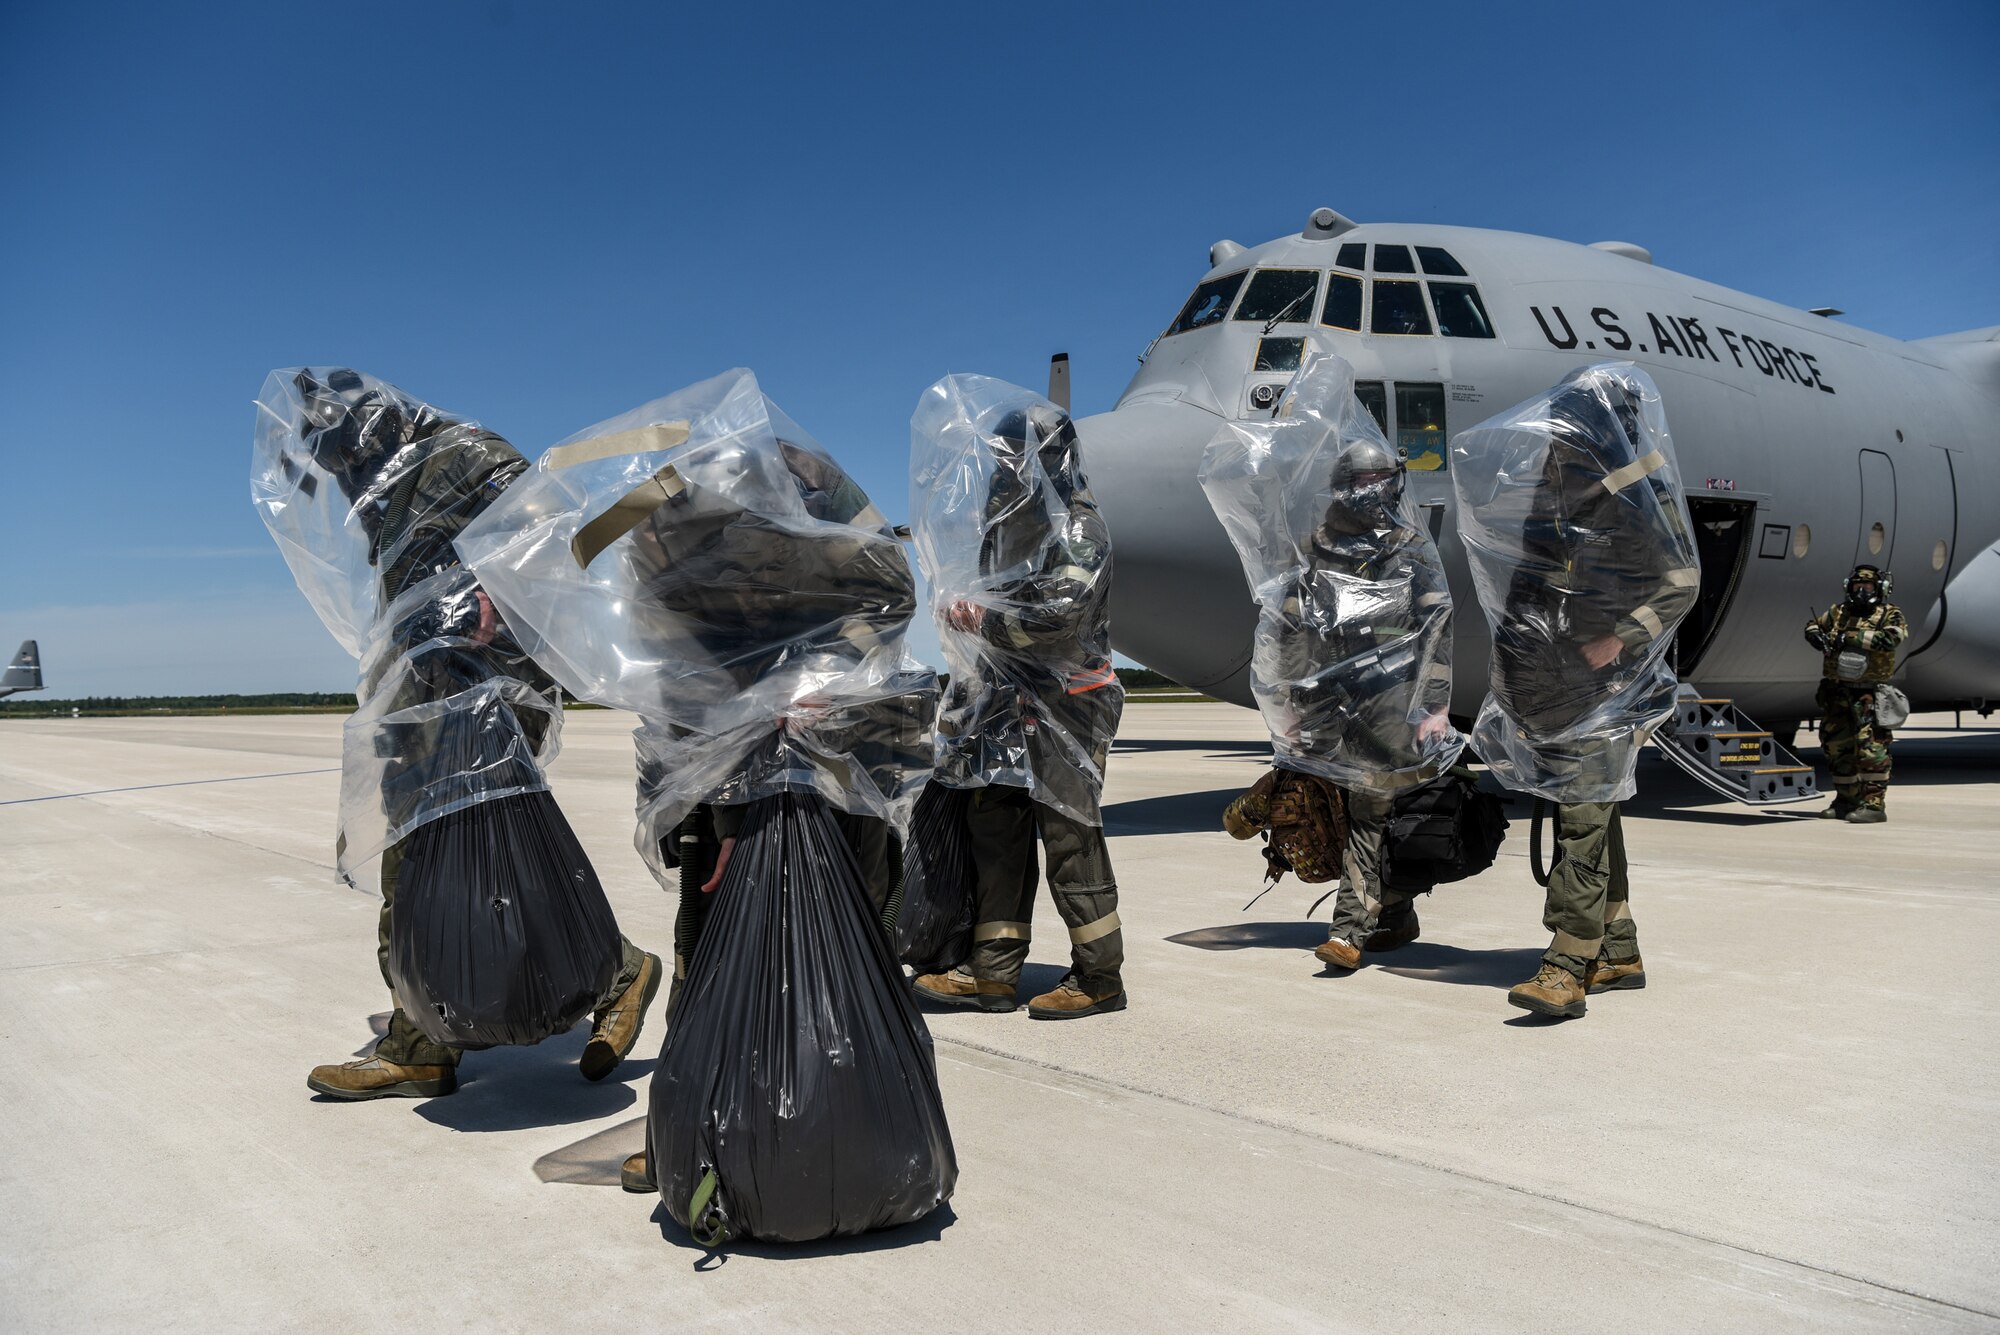 Aircrew members from the 123rd Airlift Wing simulate the evacuation of a C-130 Hercules aircraft in the event of a chemical contamination during an Operational Readiness Exercise at the Alpena Combat Readiness Training Center in Alpena, Mich., on June 23, 2019. The ORE demonstrated the wing’s ability to mobilize, fly to a remote site, operate in a hostile stateside environment and re-deploy back home while being evaluated. (U.S. Air National Guard photo by Staff Sgt. Joshua Horton)